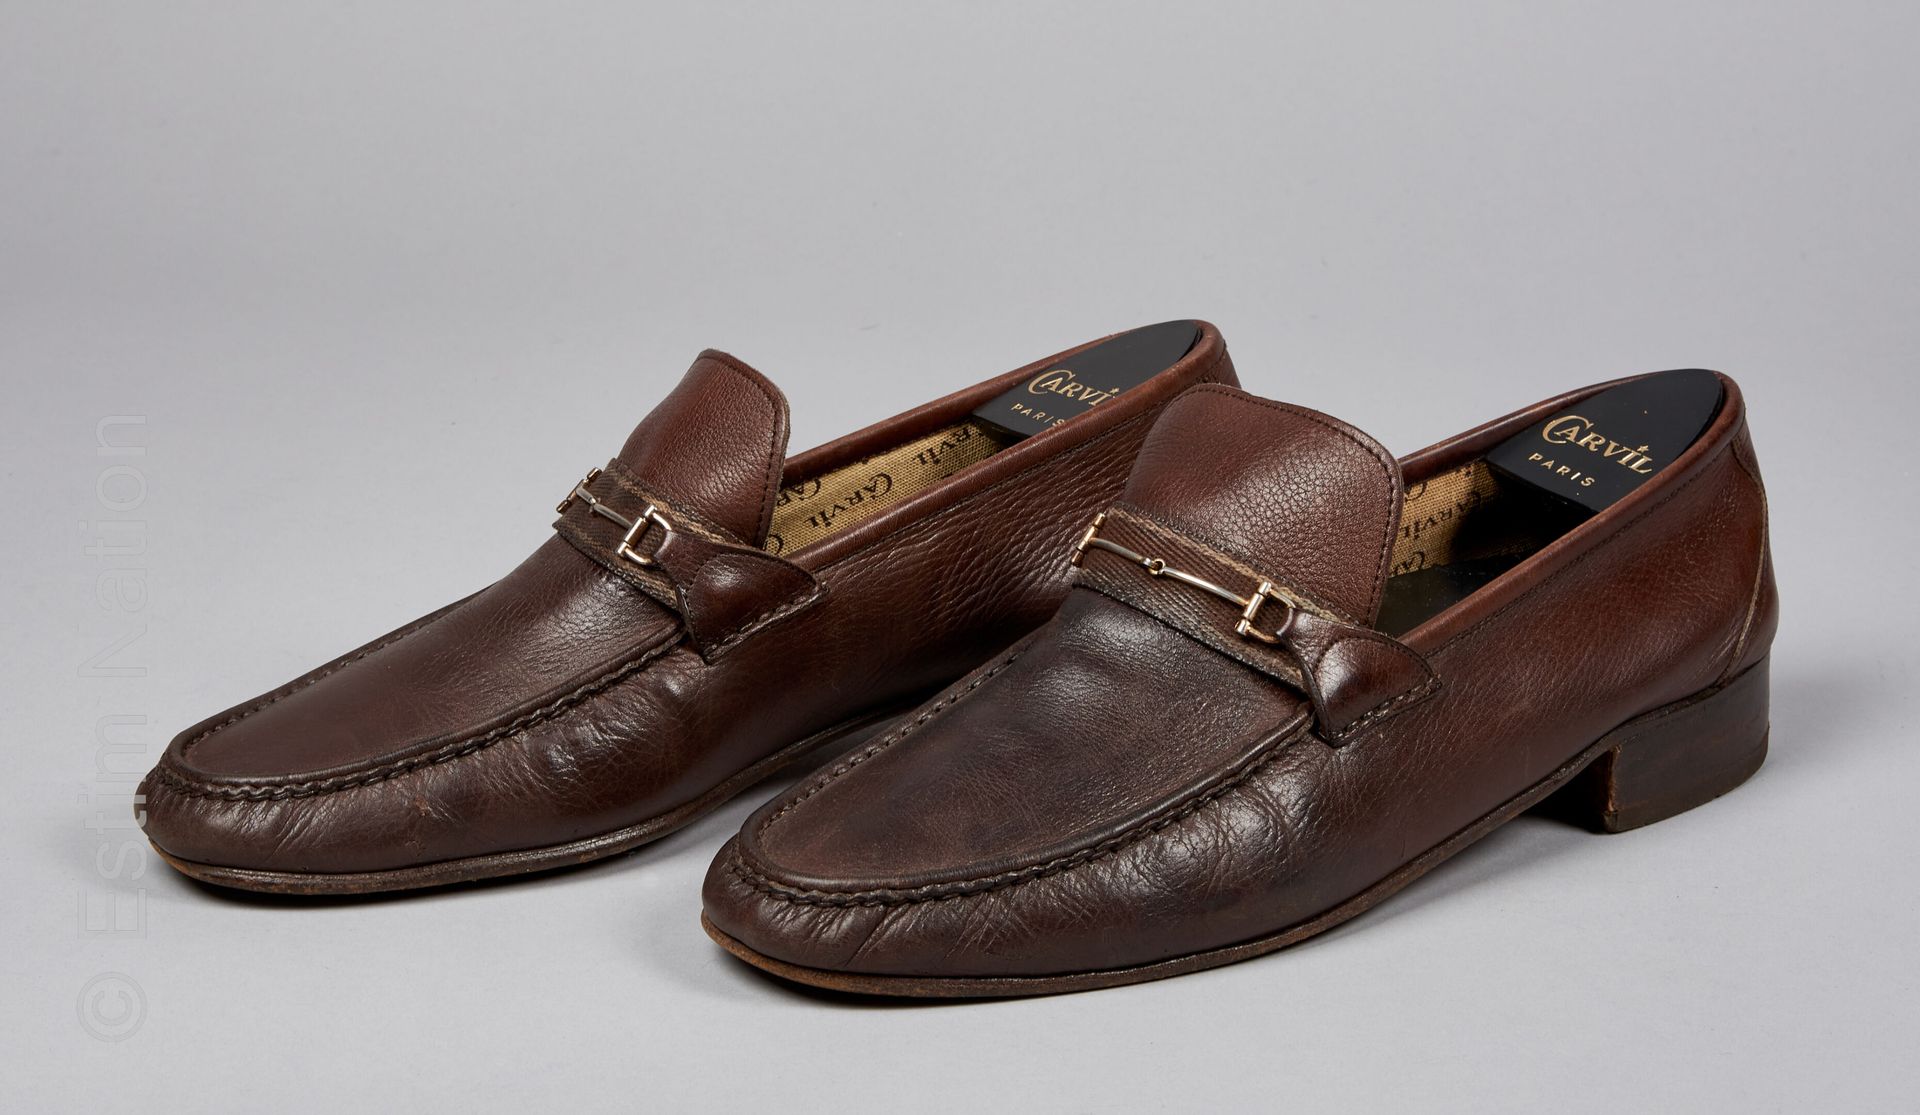 CARVIL CIRCA 1970 PAIR OF MOCASSINS with strap in chocolate stag, bit on the vam&hellip;